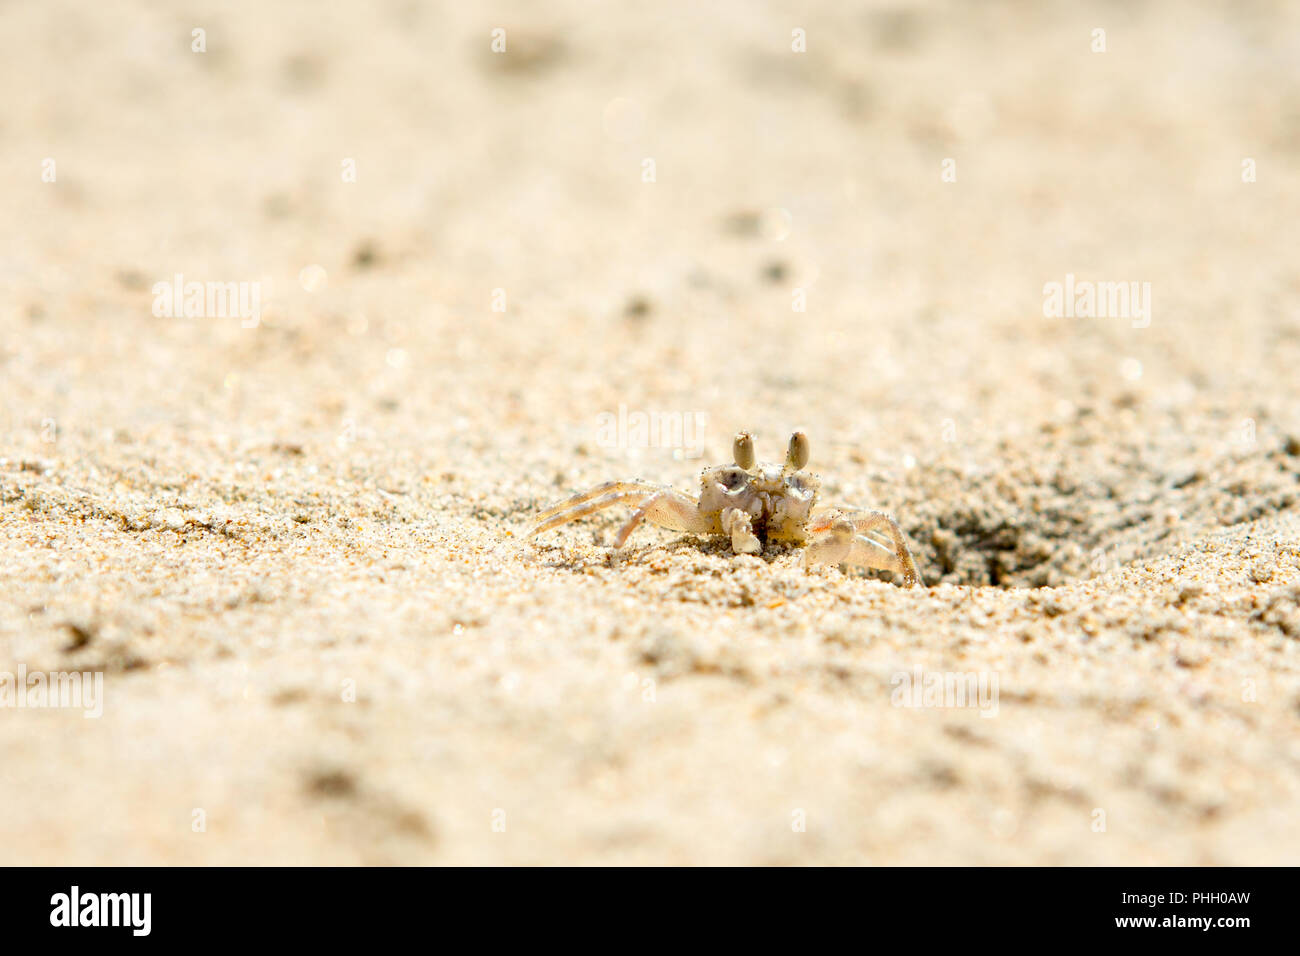 Small crabs on the beach in the sand Stock Photo